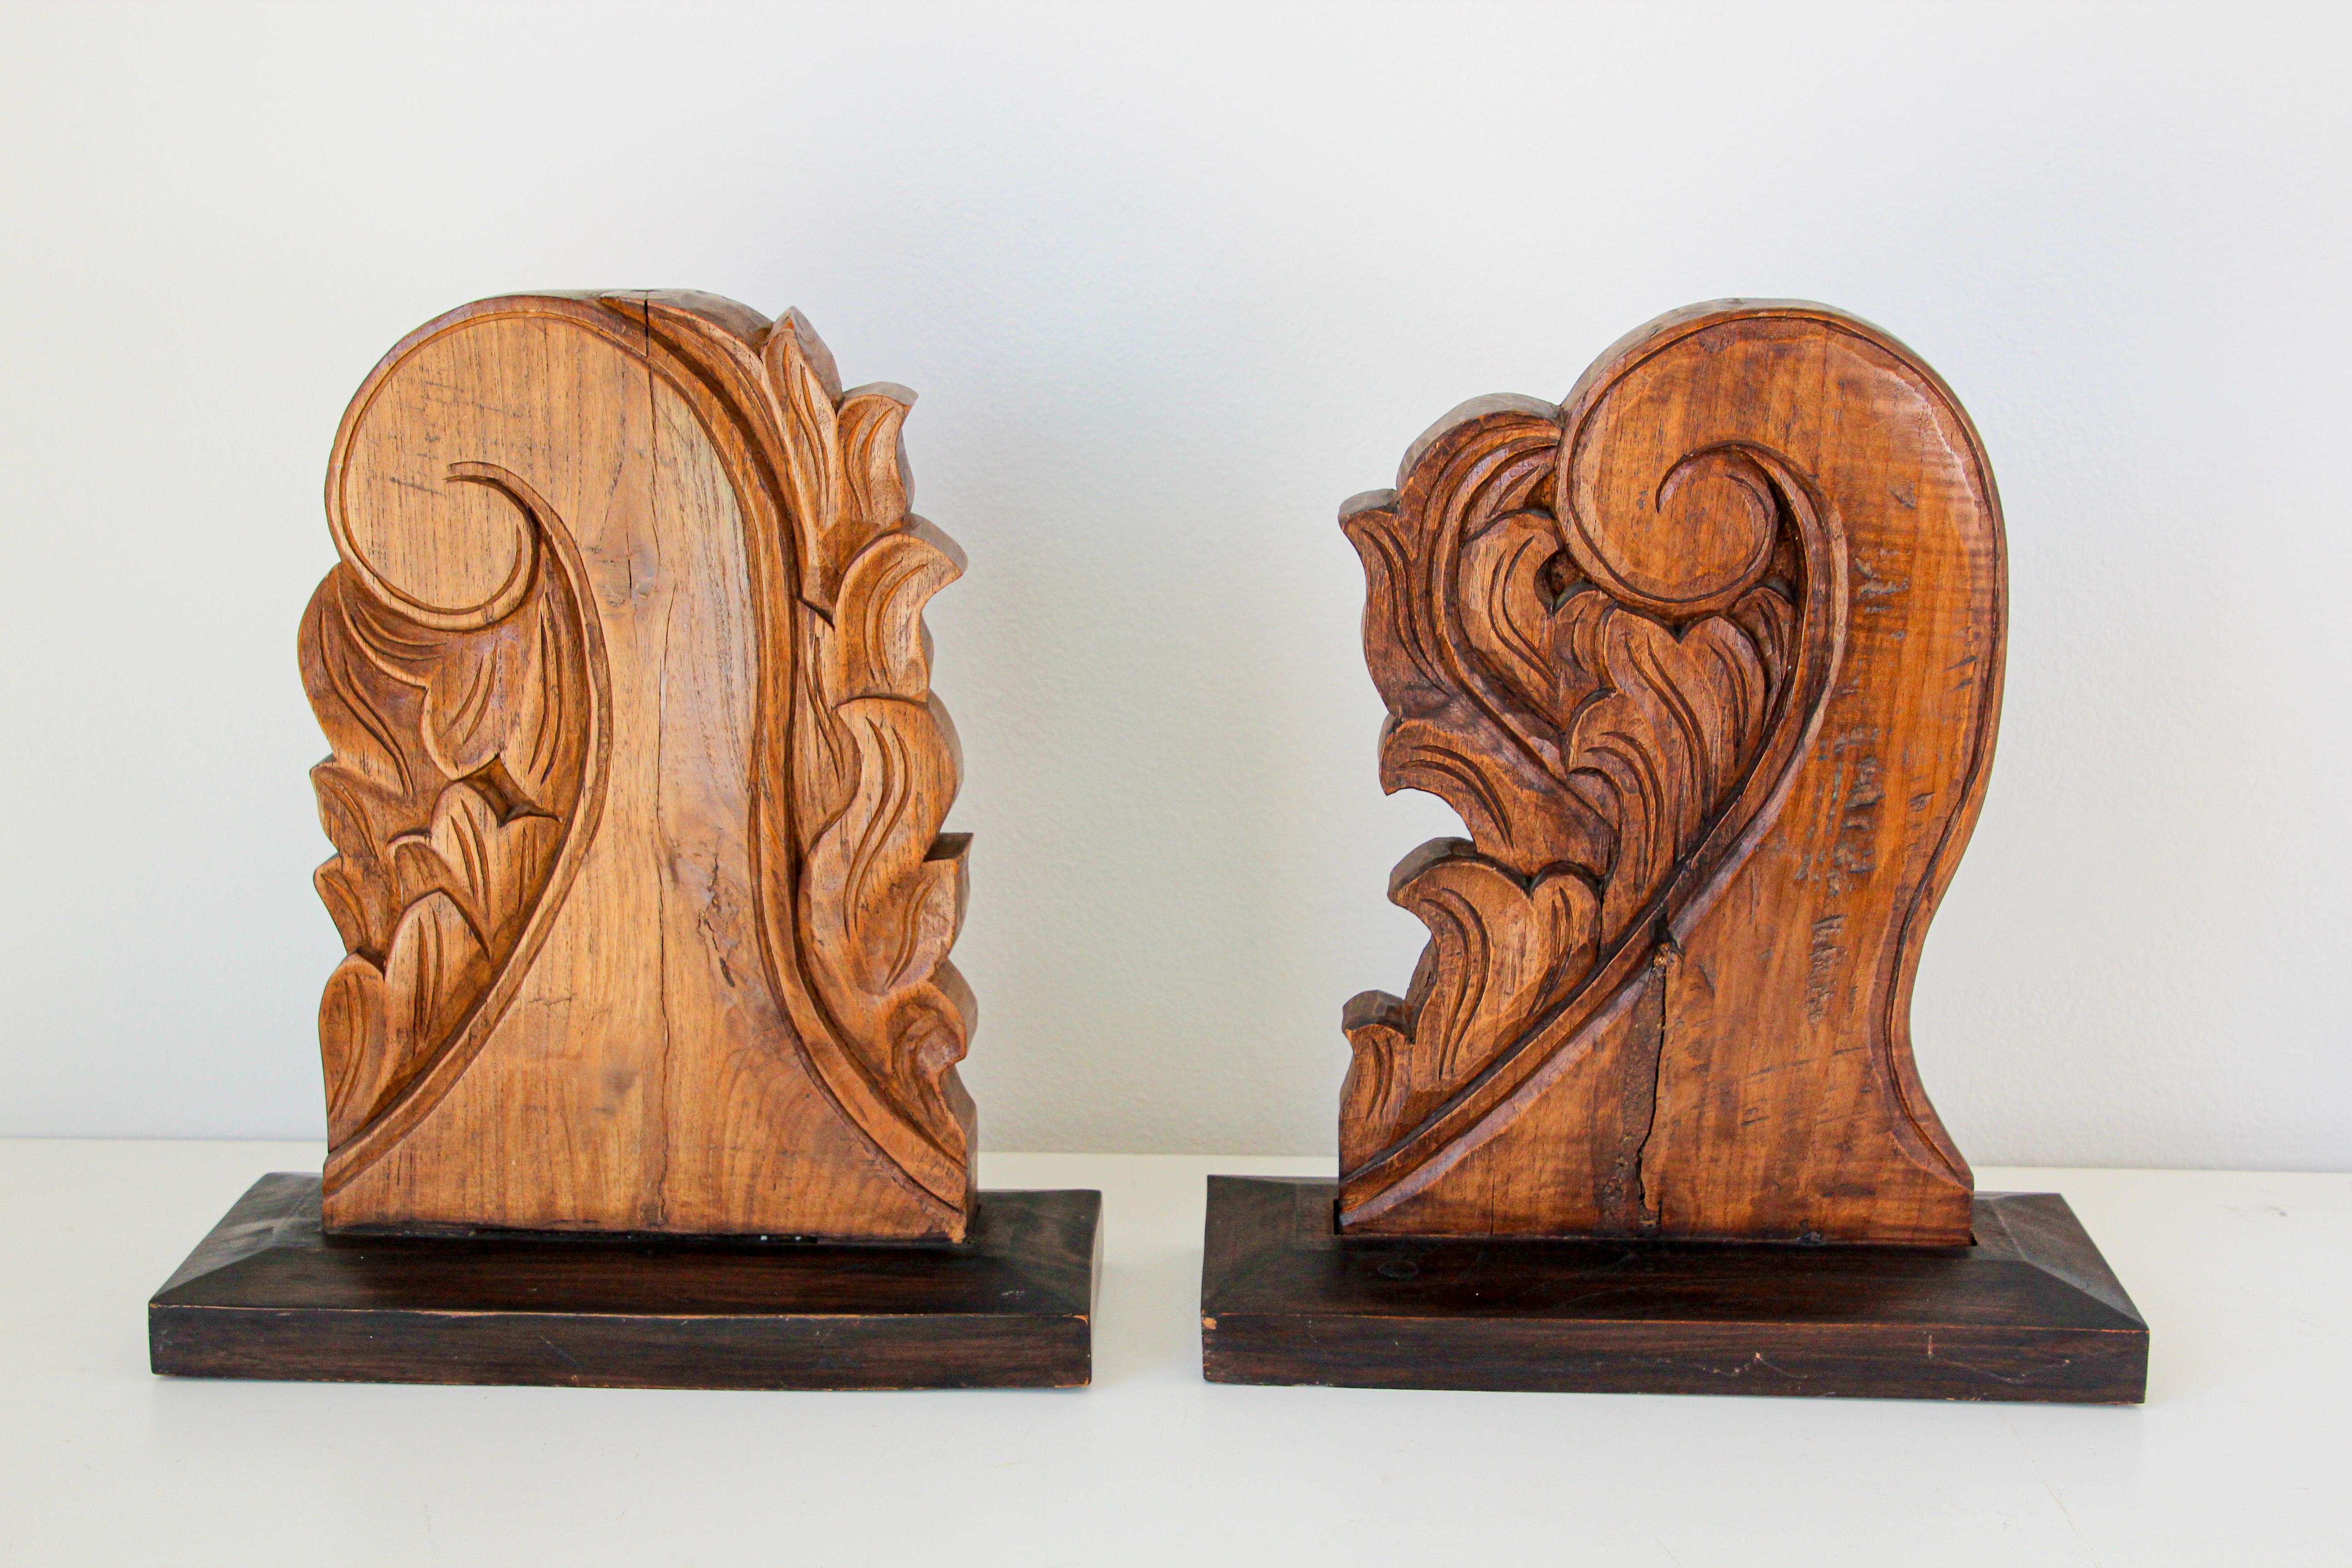 Pair of mounted antique architectural carved wood fragment from Europe mounted.
This antique fragment were elements of a section of hand carved wood frieze.
Mounted on a custom made, rectangular-shaped wood base, beautifully aged wood, will make